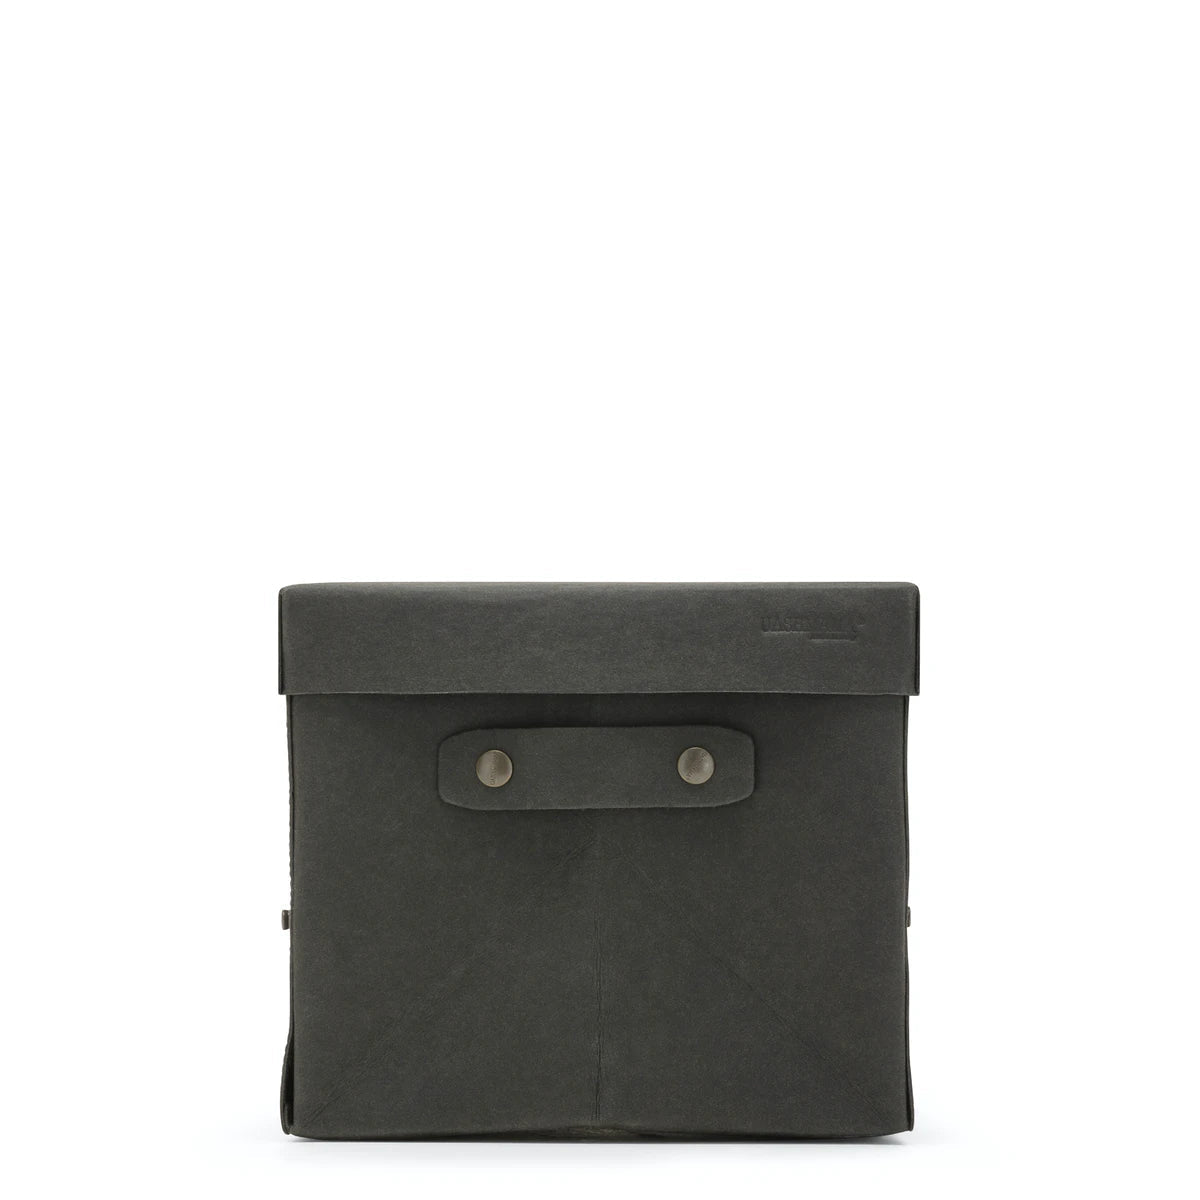 A black washable paper lidded box is shown from the front angle. It features a metal stud handle and the UASHMAMA logo embossed on the right hand side of the lid.